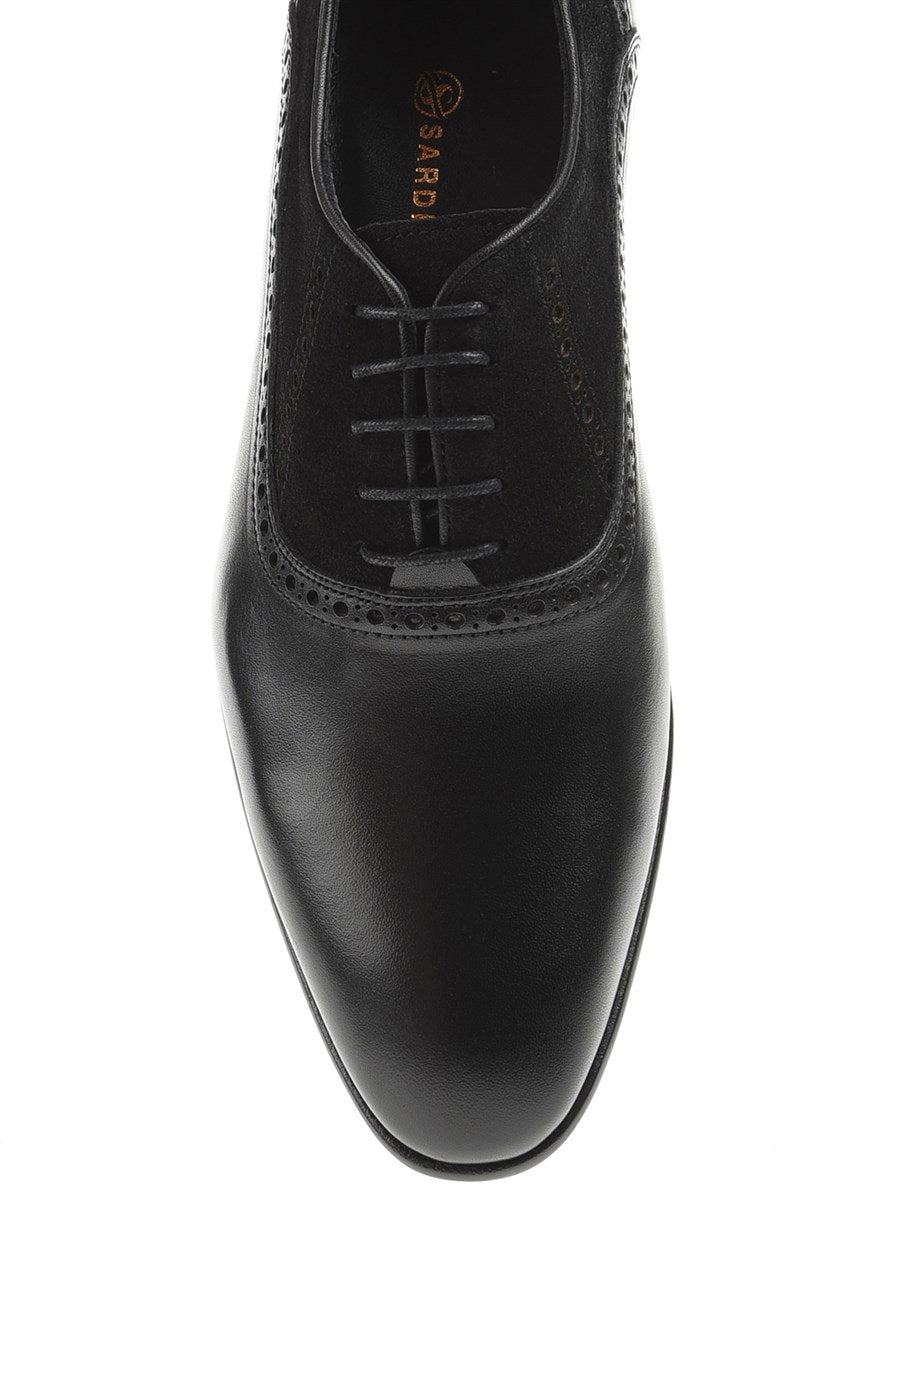 Special Design Leather Sole Classic Shoes - MENSTYLEWITH